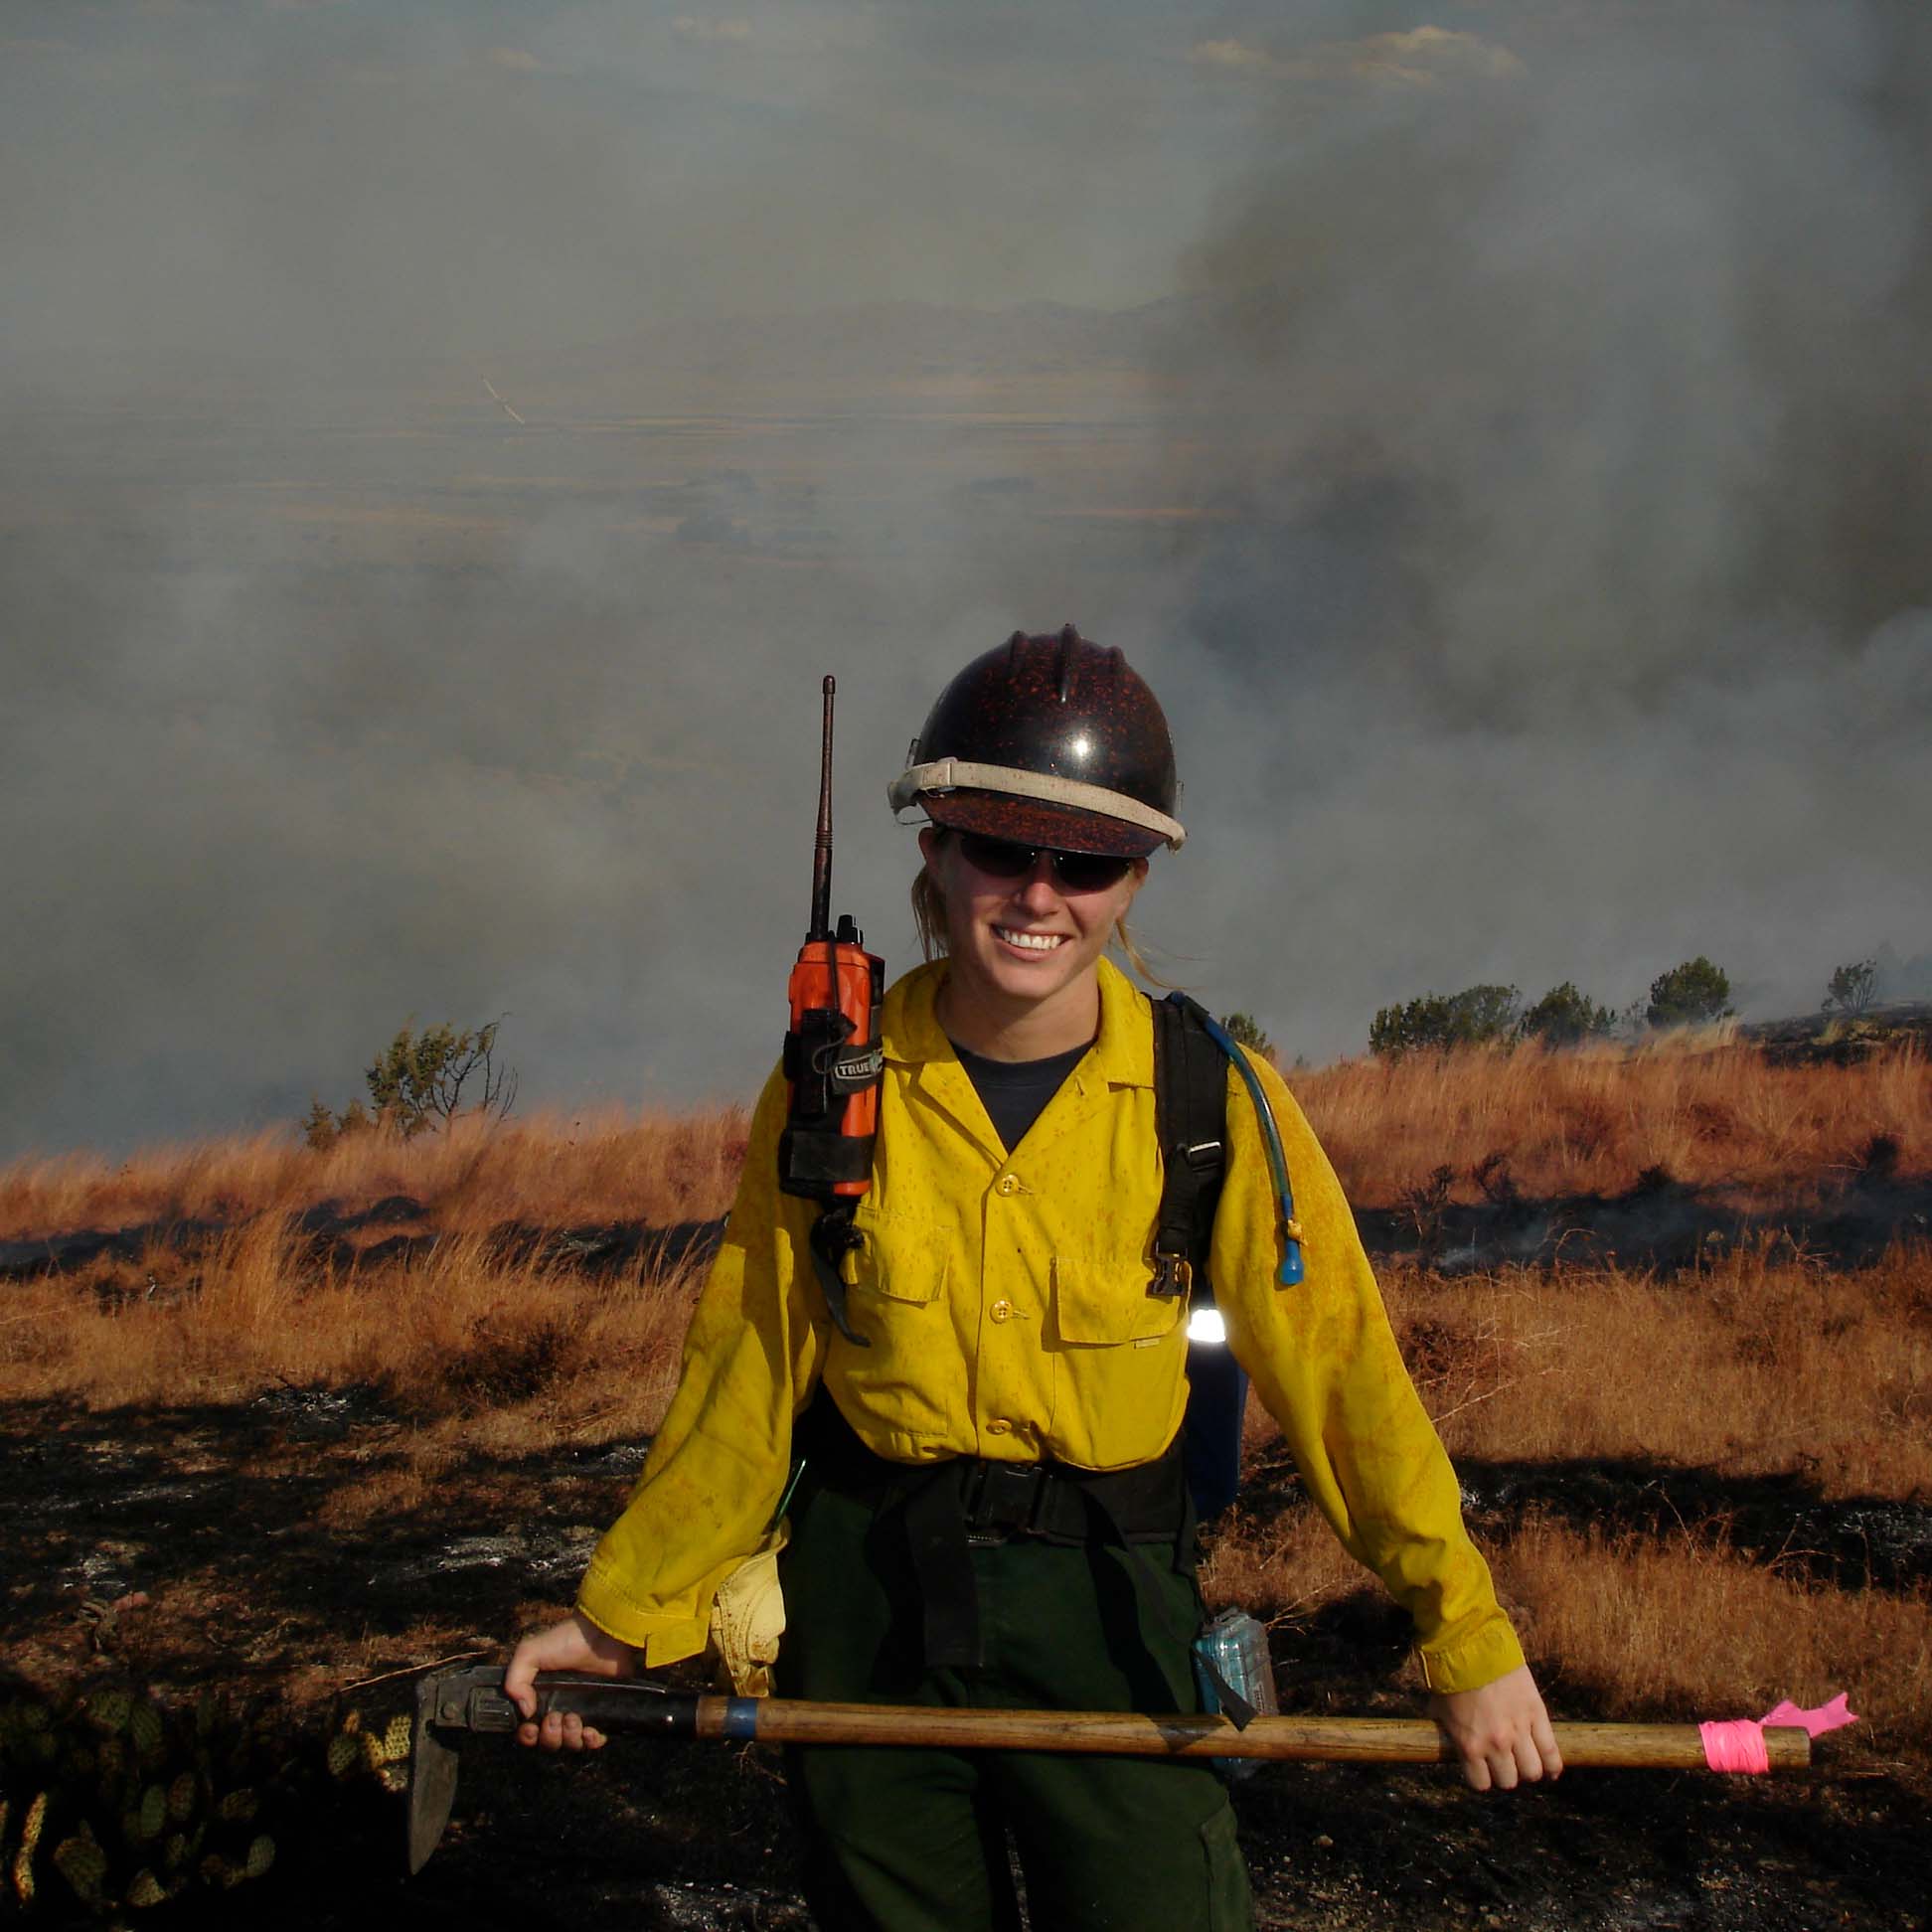 A person wearing a safety helmet wearing a yellow shirt and carrying a hoe smiles at the viewer in front of burnt vegetation.